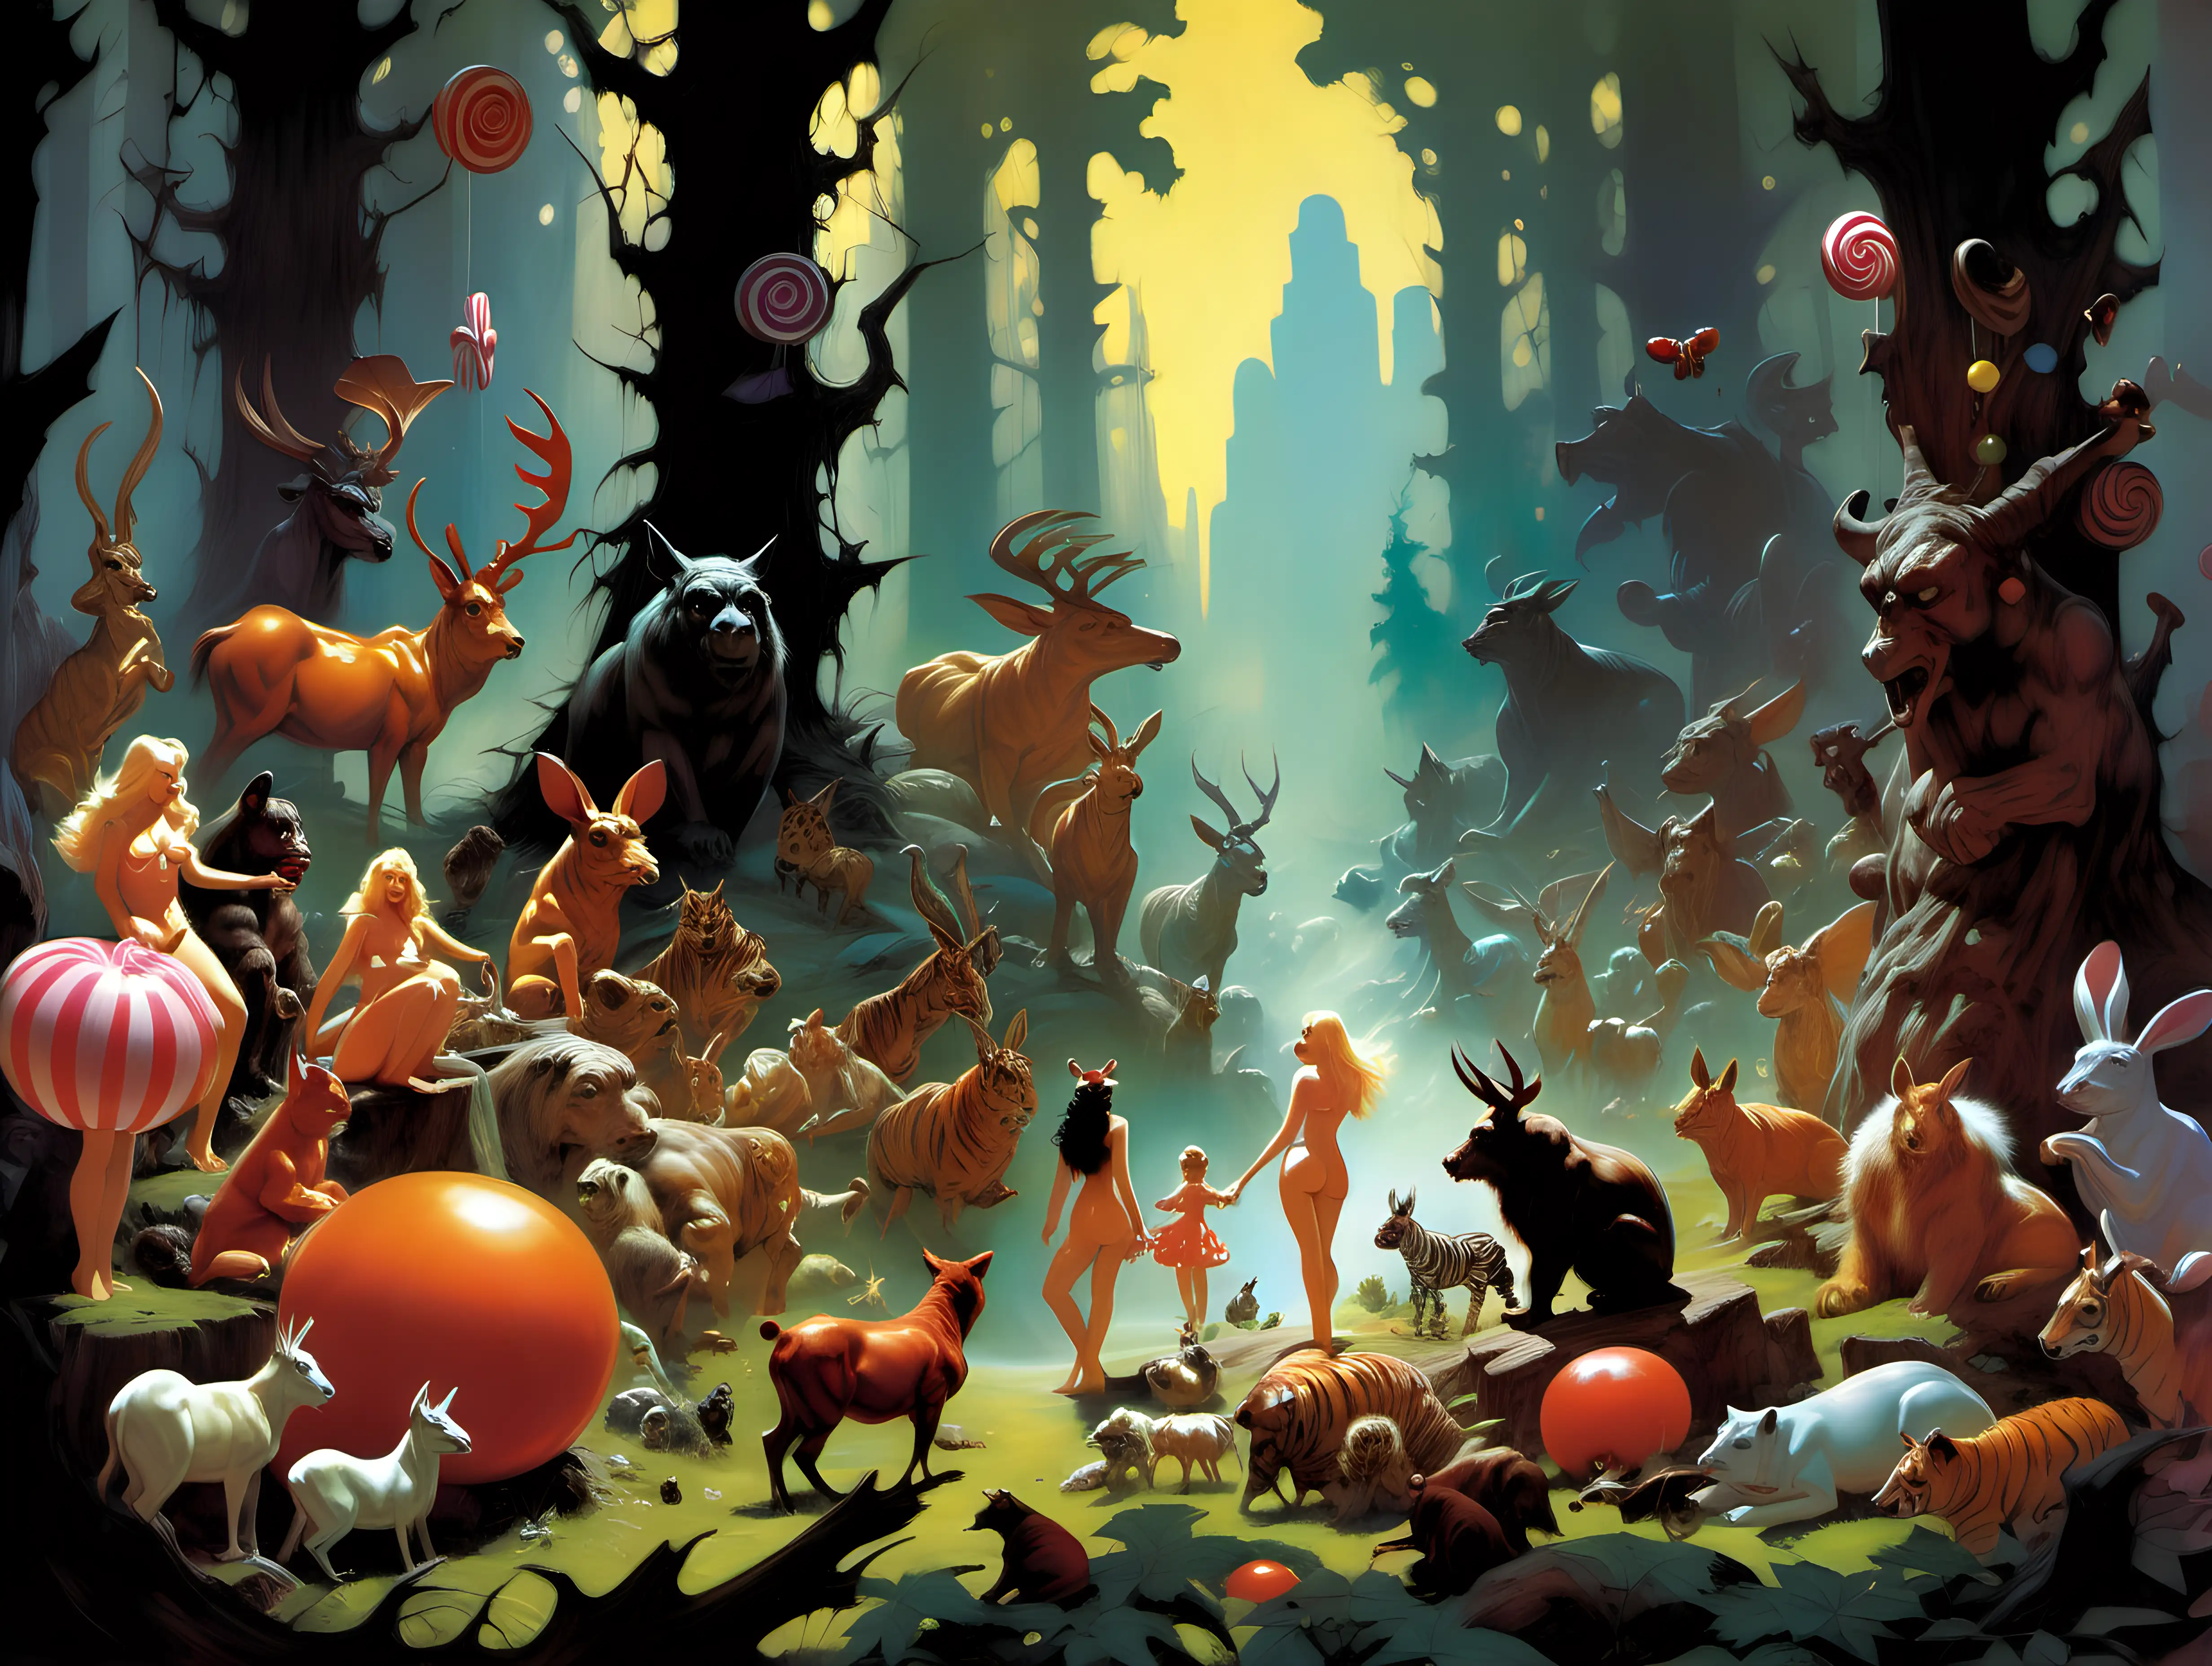 Enchanted Forest Candy Adventure with Wildlife in Frank Frazetta Style